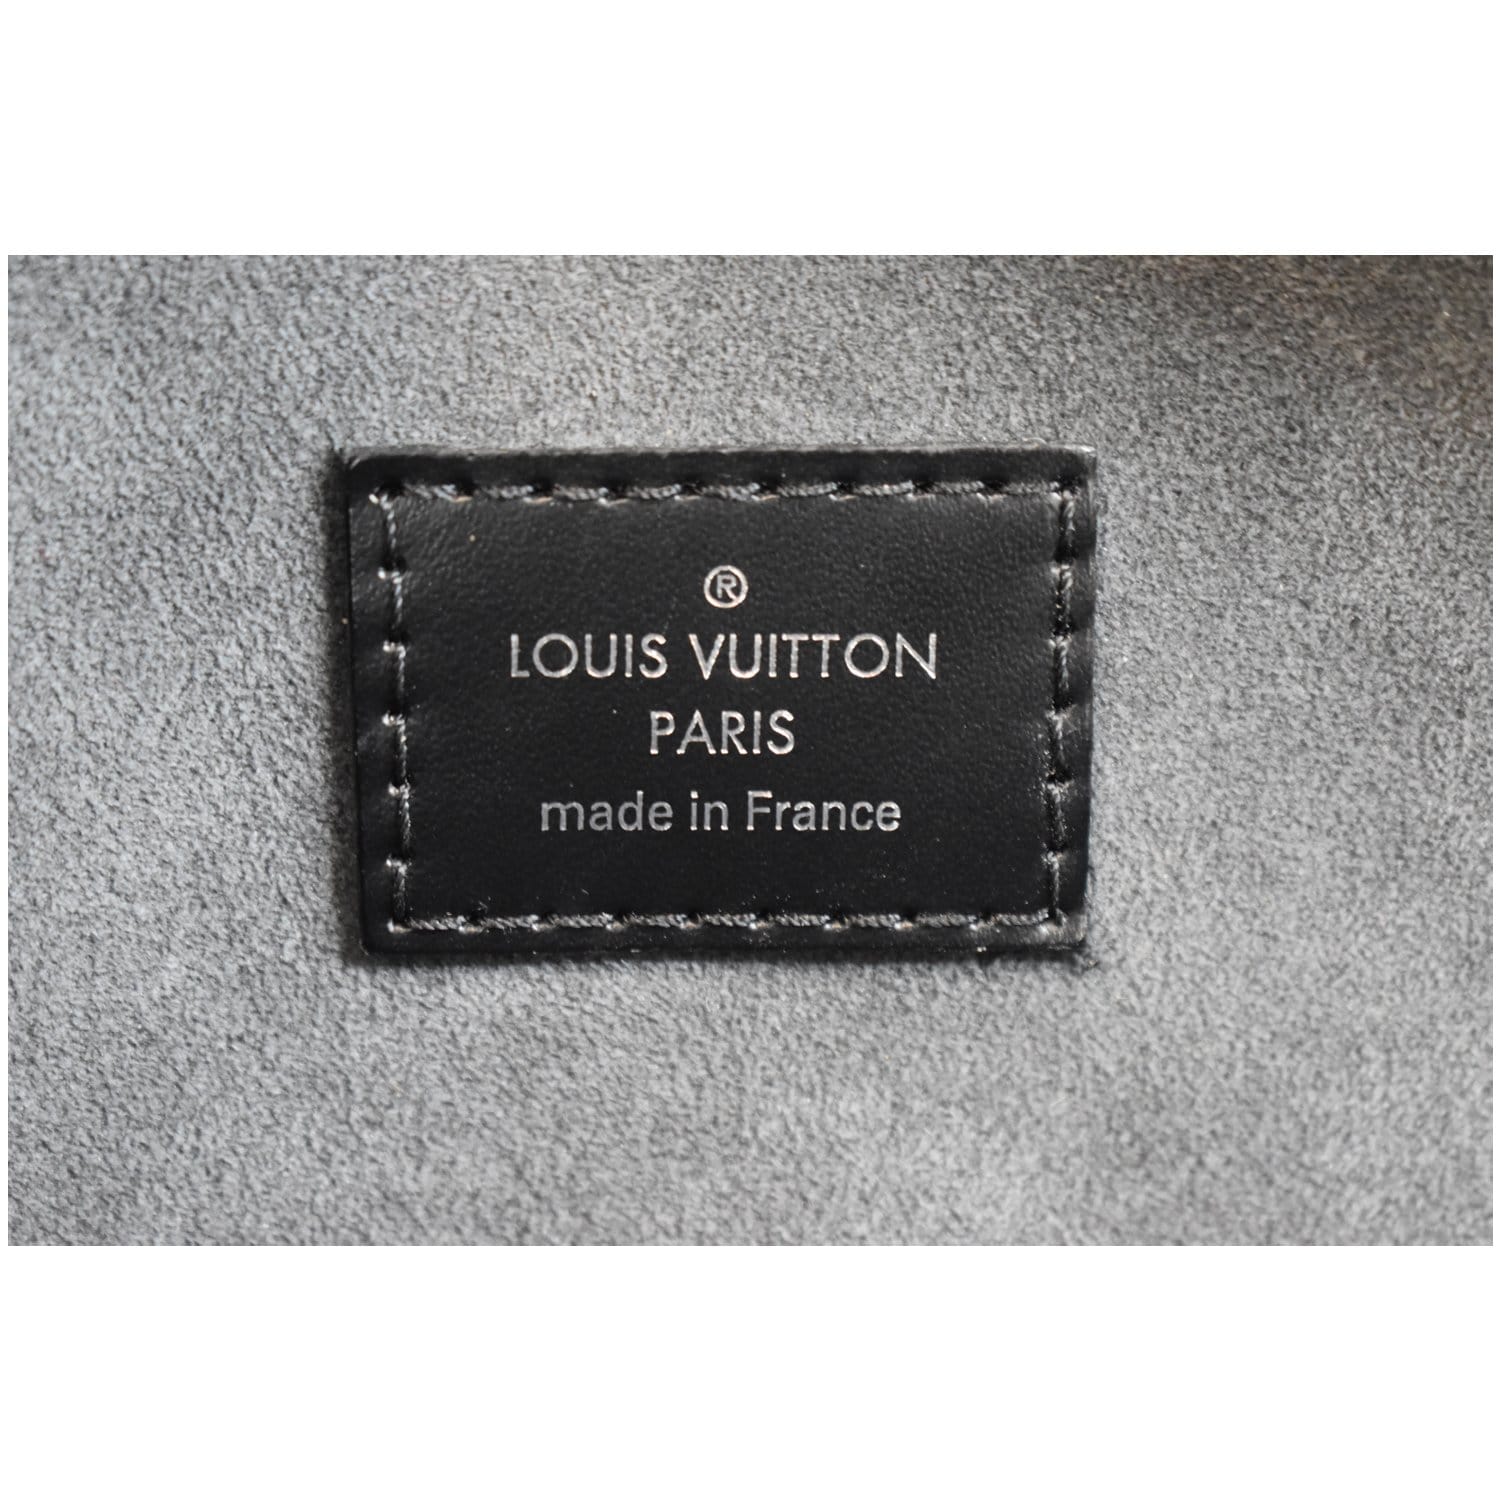 🥳SOLD Louis Vuitton Pont Neuf PM in Epi Leather ✓ Dustbag